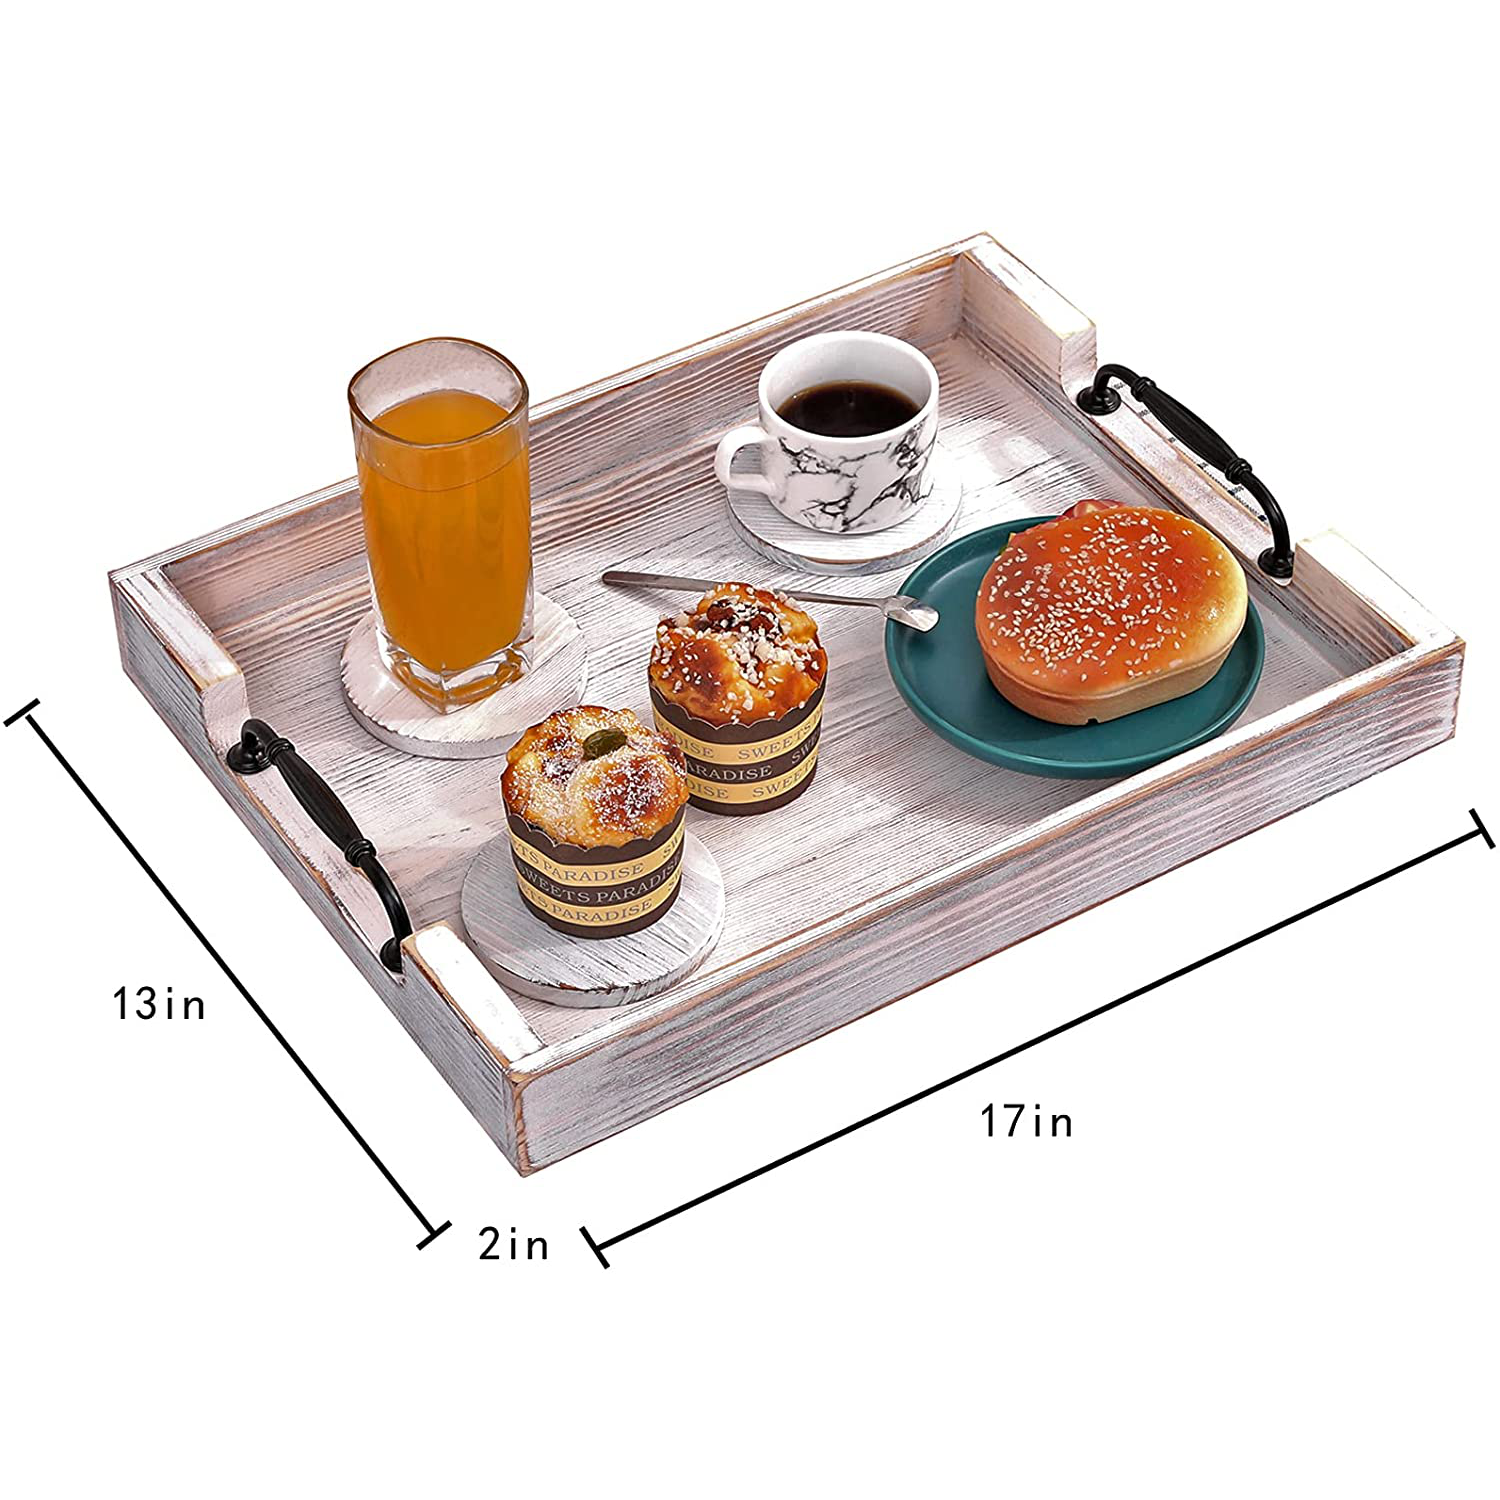 Wooden Serving Tray with Handle Large Ottoman Rustic Wooden Trays for Coffee Table,Ottoman Trays Home Decor Farmhouse Tray,Bed Tray for Breakfast in Bed,Dinner Tray,Including 4 Round Wooden Coasters